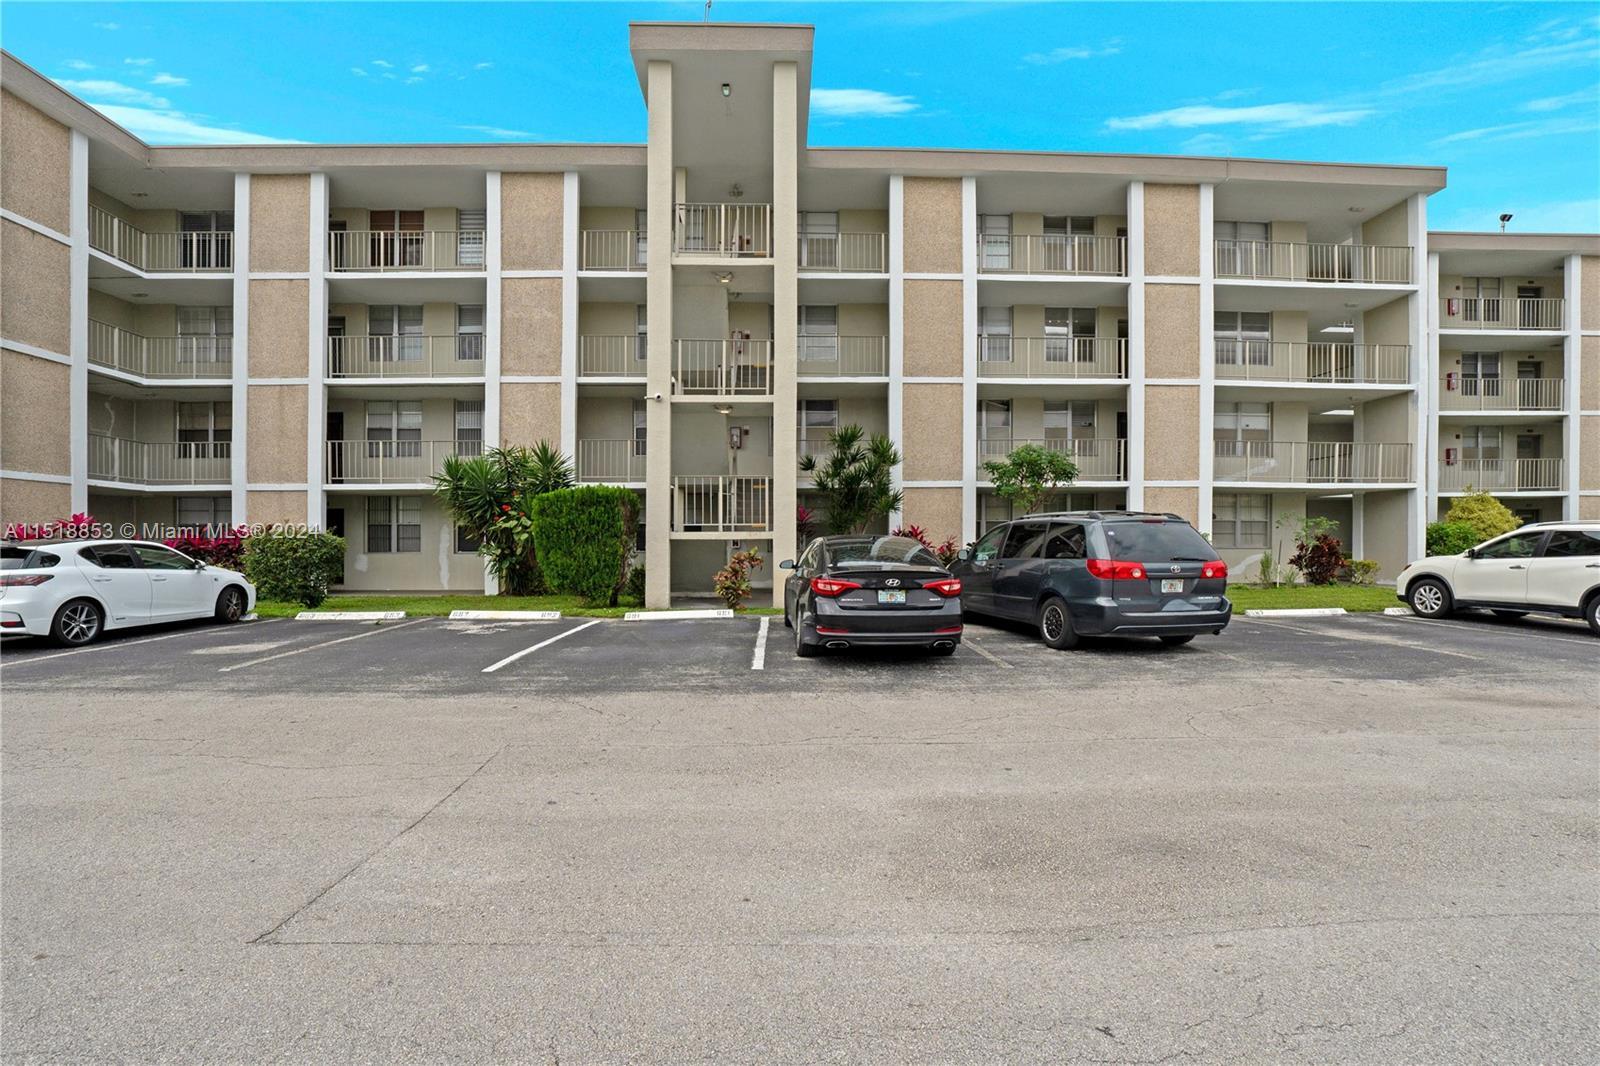 Photo of 2901 NW 48th Ave #355 in Lauderdale Lakes, FL